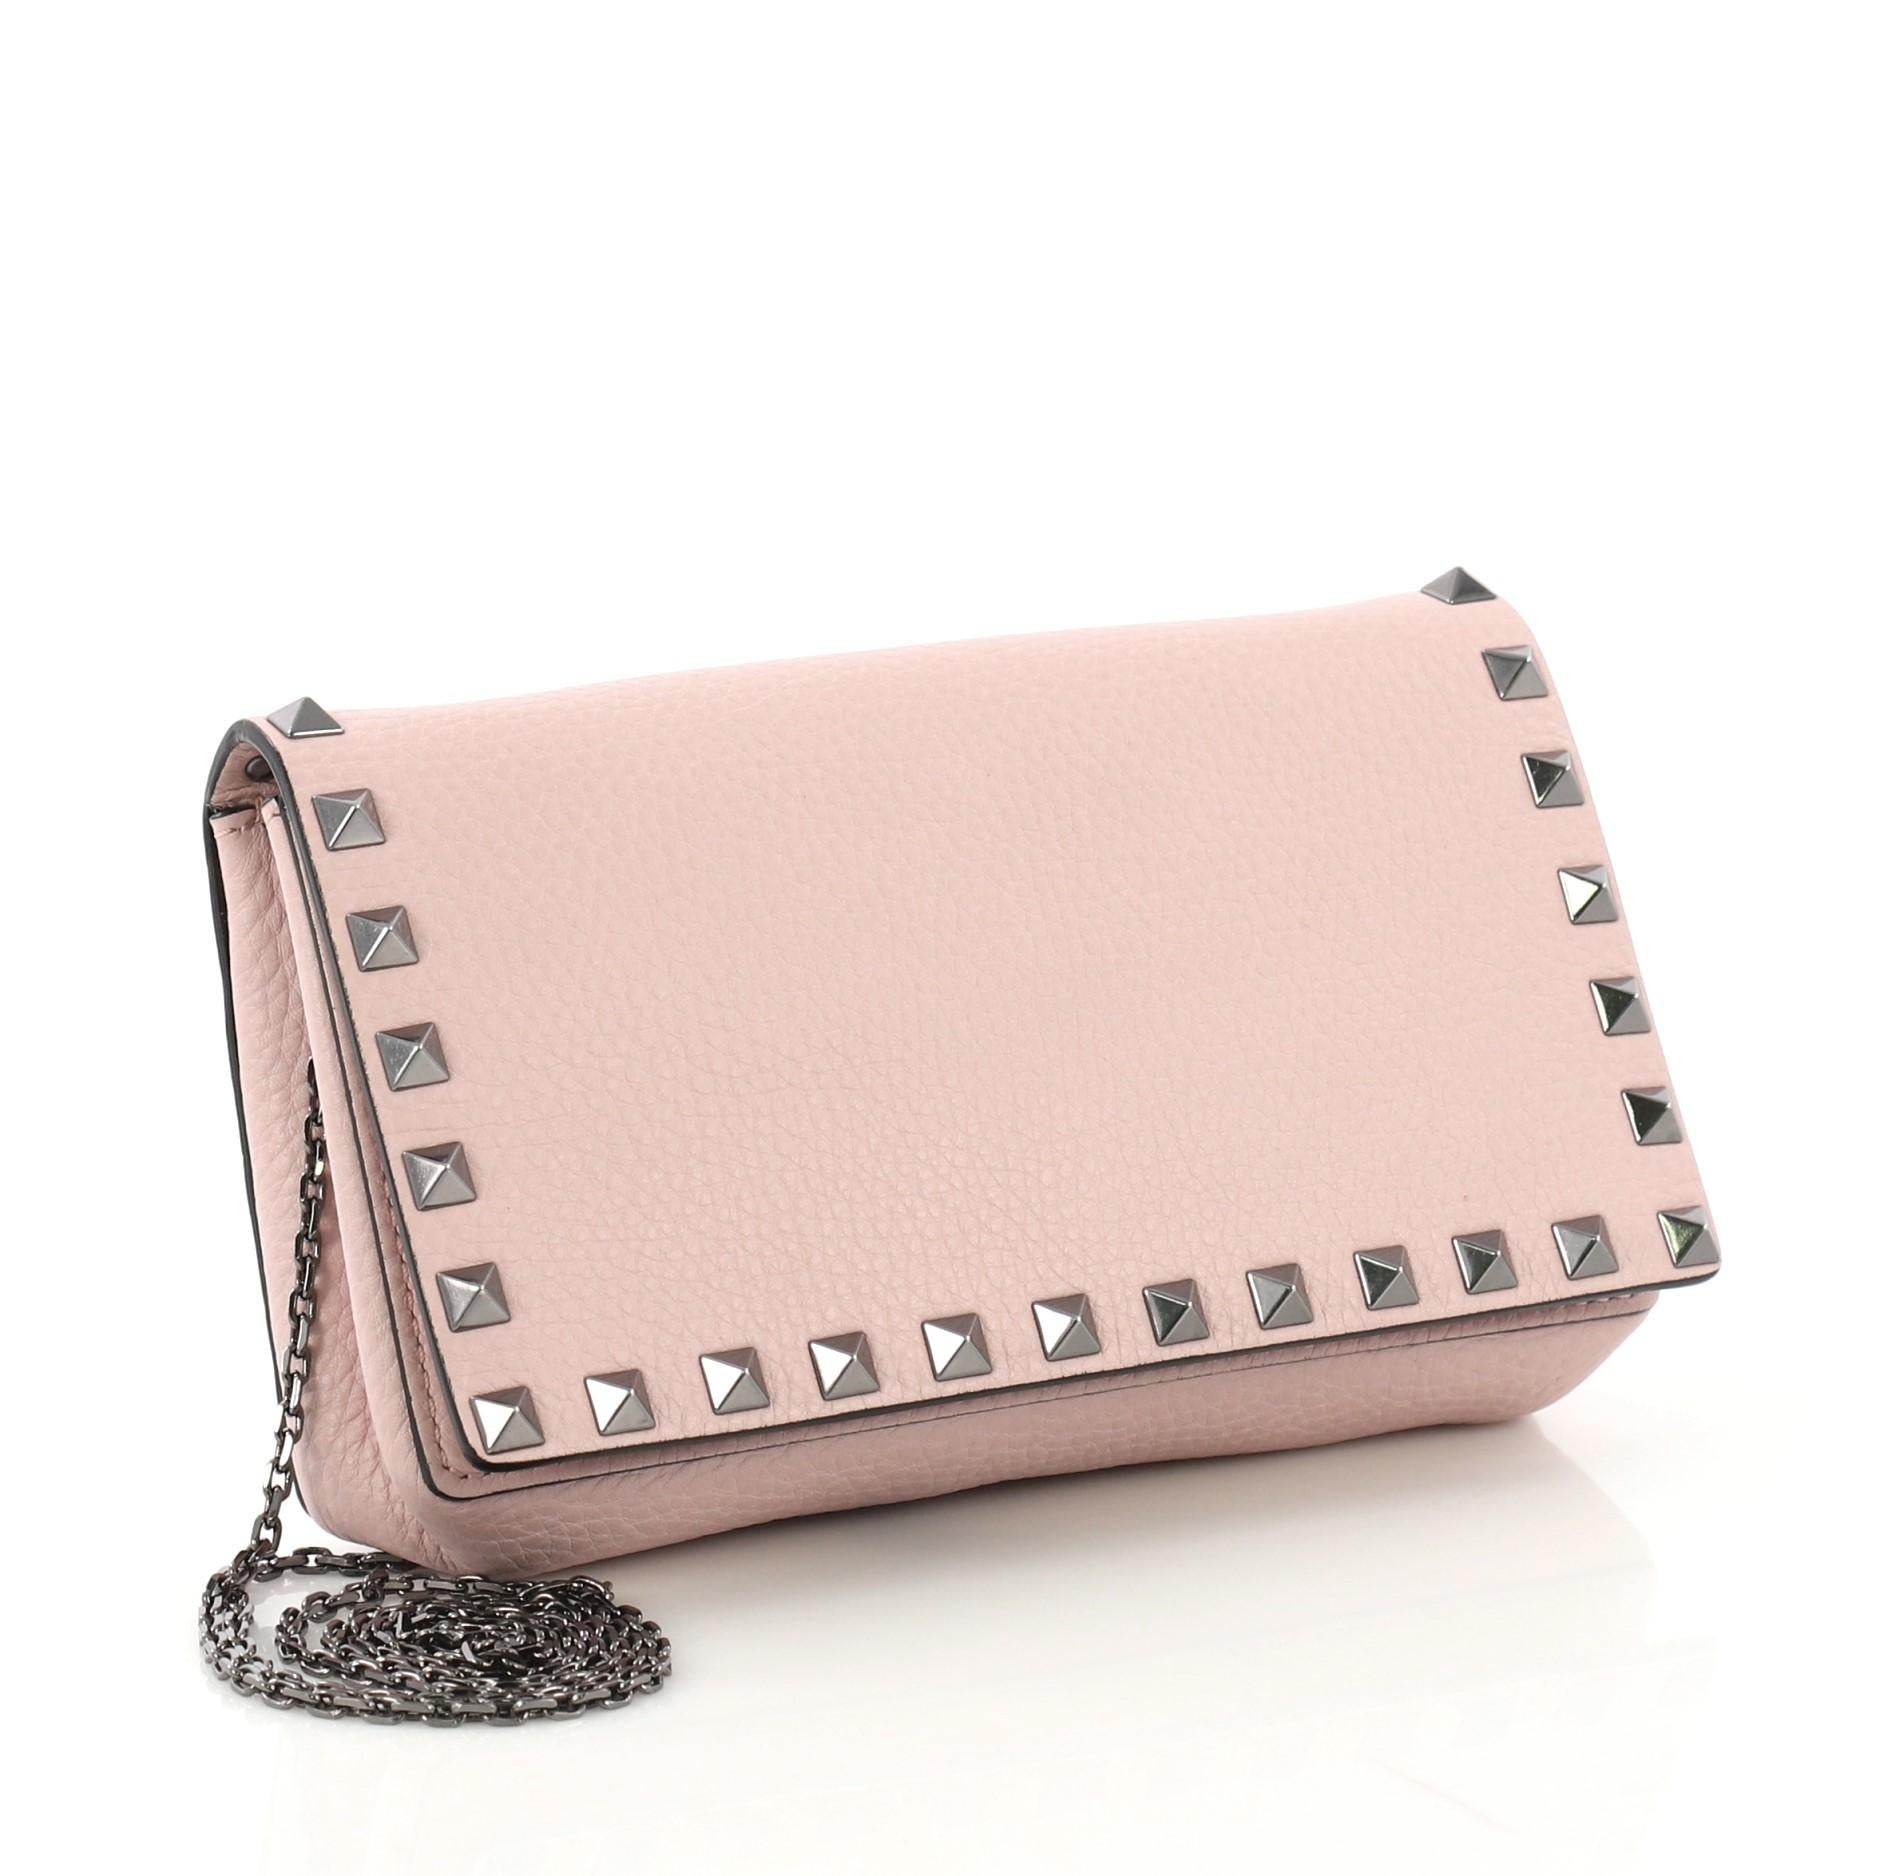 This Valentino Rockstud Wallet On Chain Leather, crafted from pink leather, features pyramid stud embellishments, chain straps, and gunmetal-tone hardware. Its magnetic snap closure opens to a pink suede interior with multiple card slots, slip